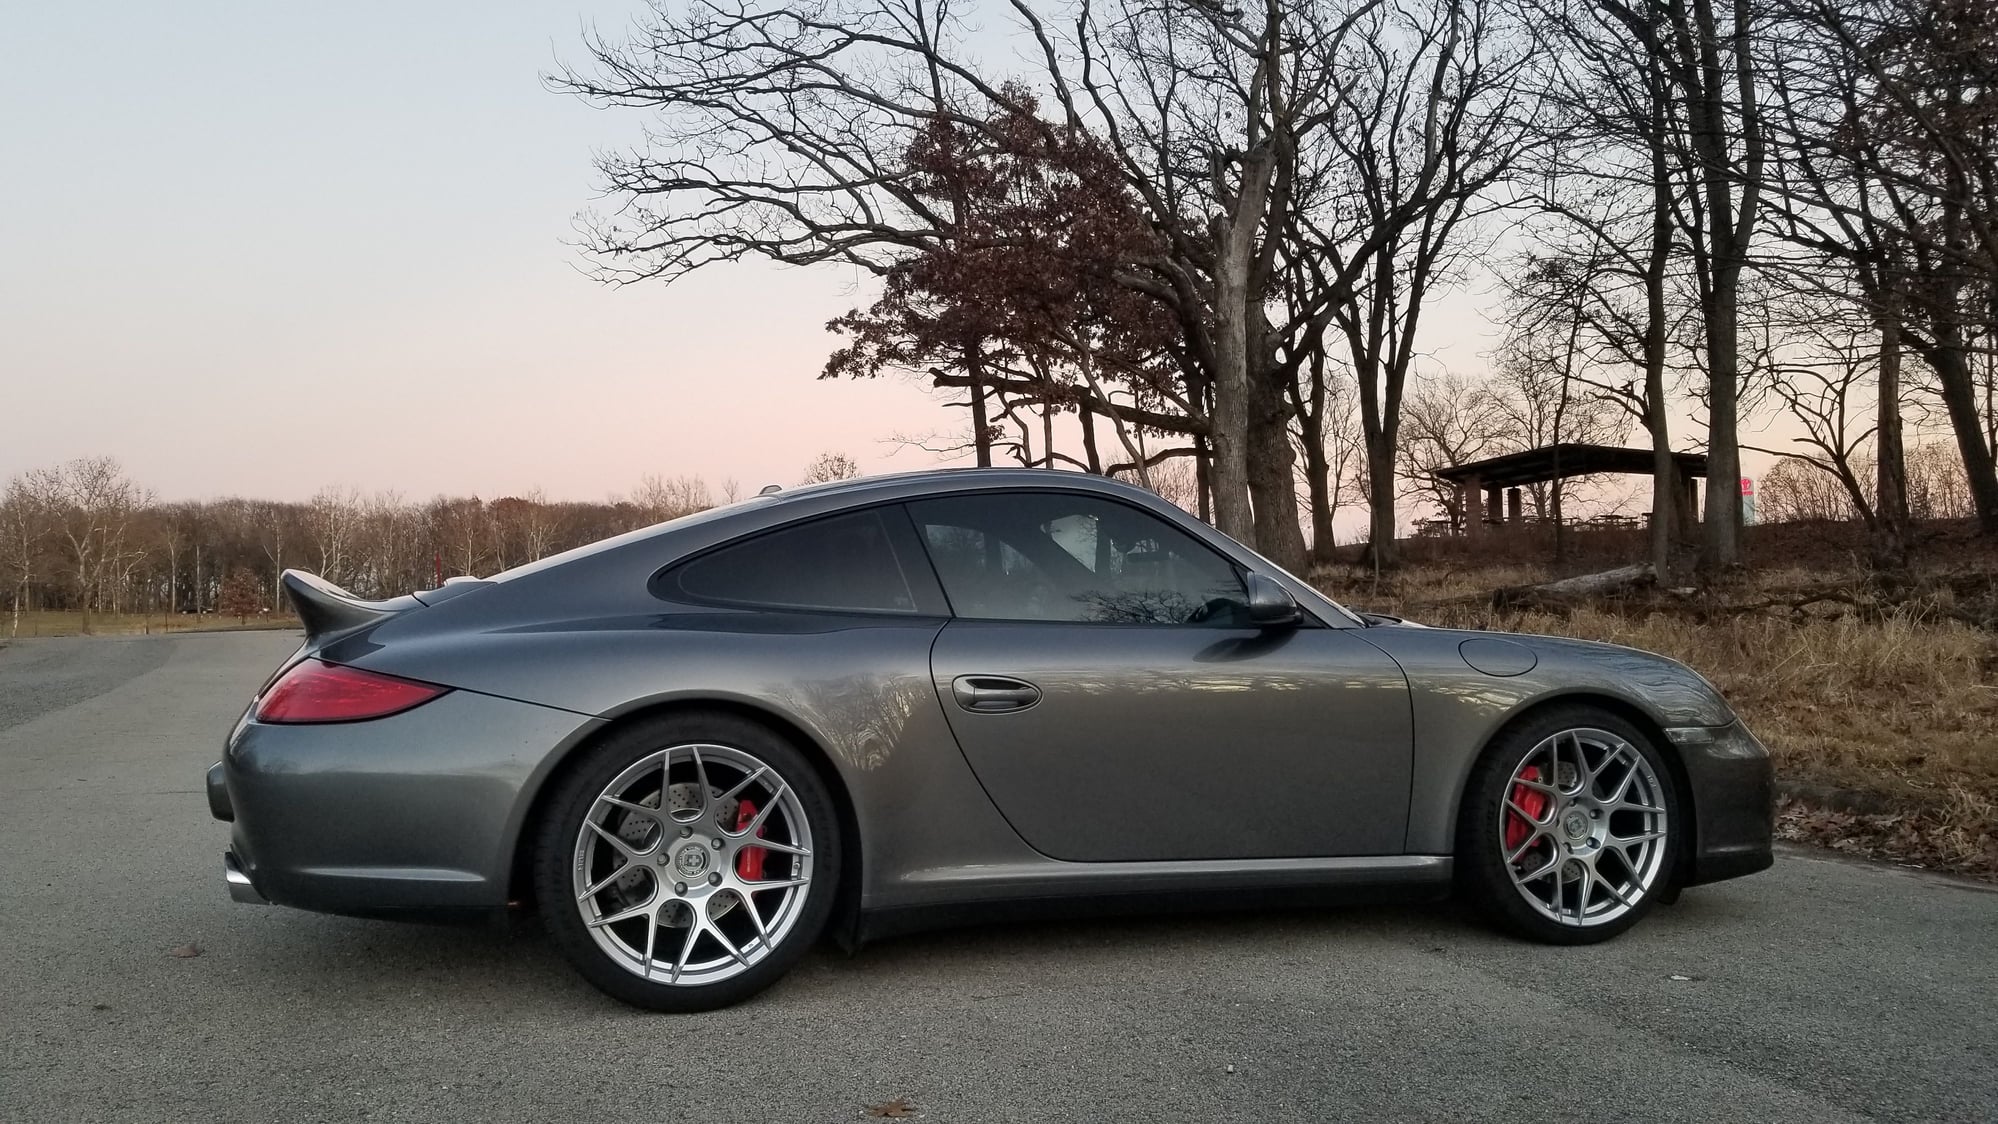 2009 Porsche 911 - feeler: 4.0 Liter 2009 911 C4S 997.2 PDK, engine by Jake Raby / Flat Six Innovations - Used - VIN see build sheet - 80,600 Miles - 6 cyl - AWD - Automatic - Coupe - Gray - Lyons, IL 60534, United States